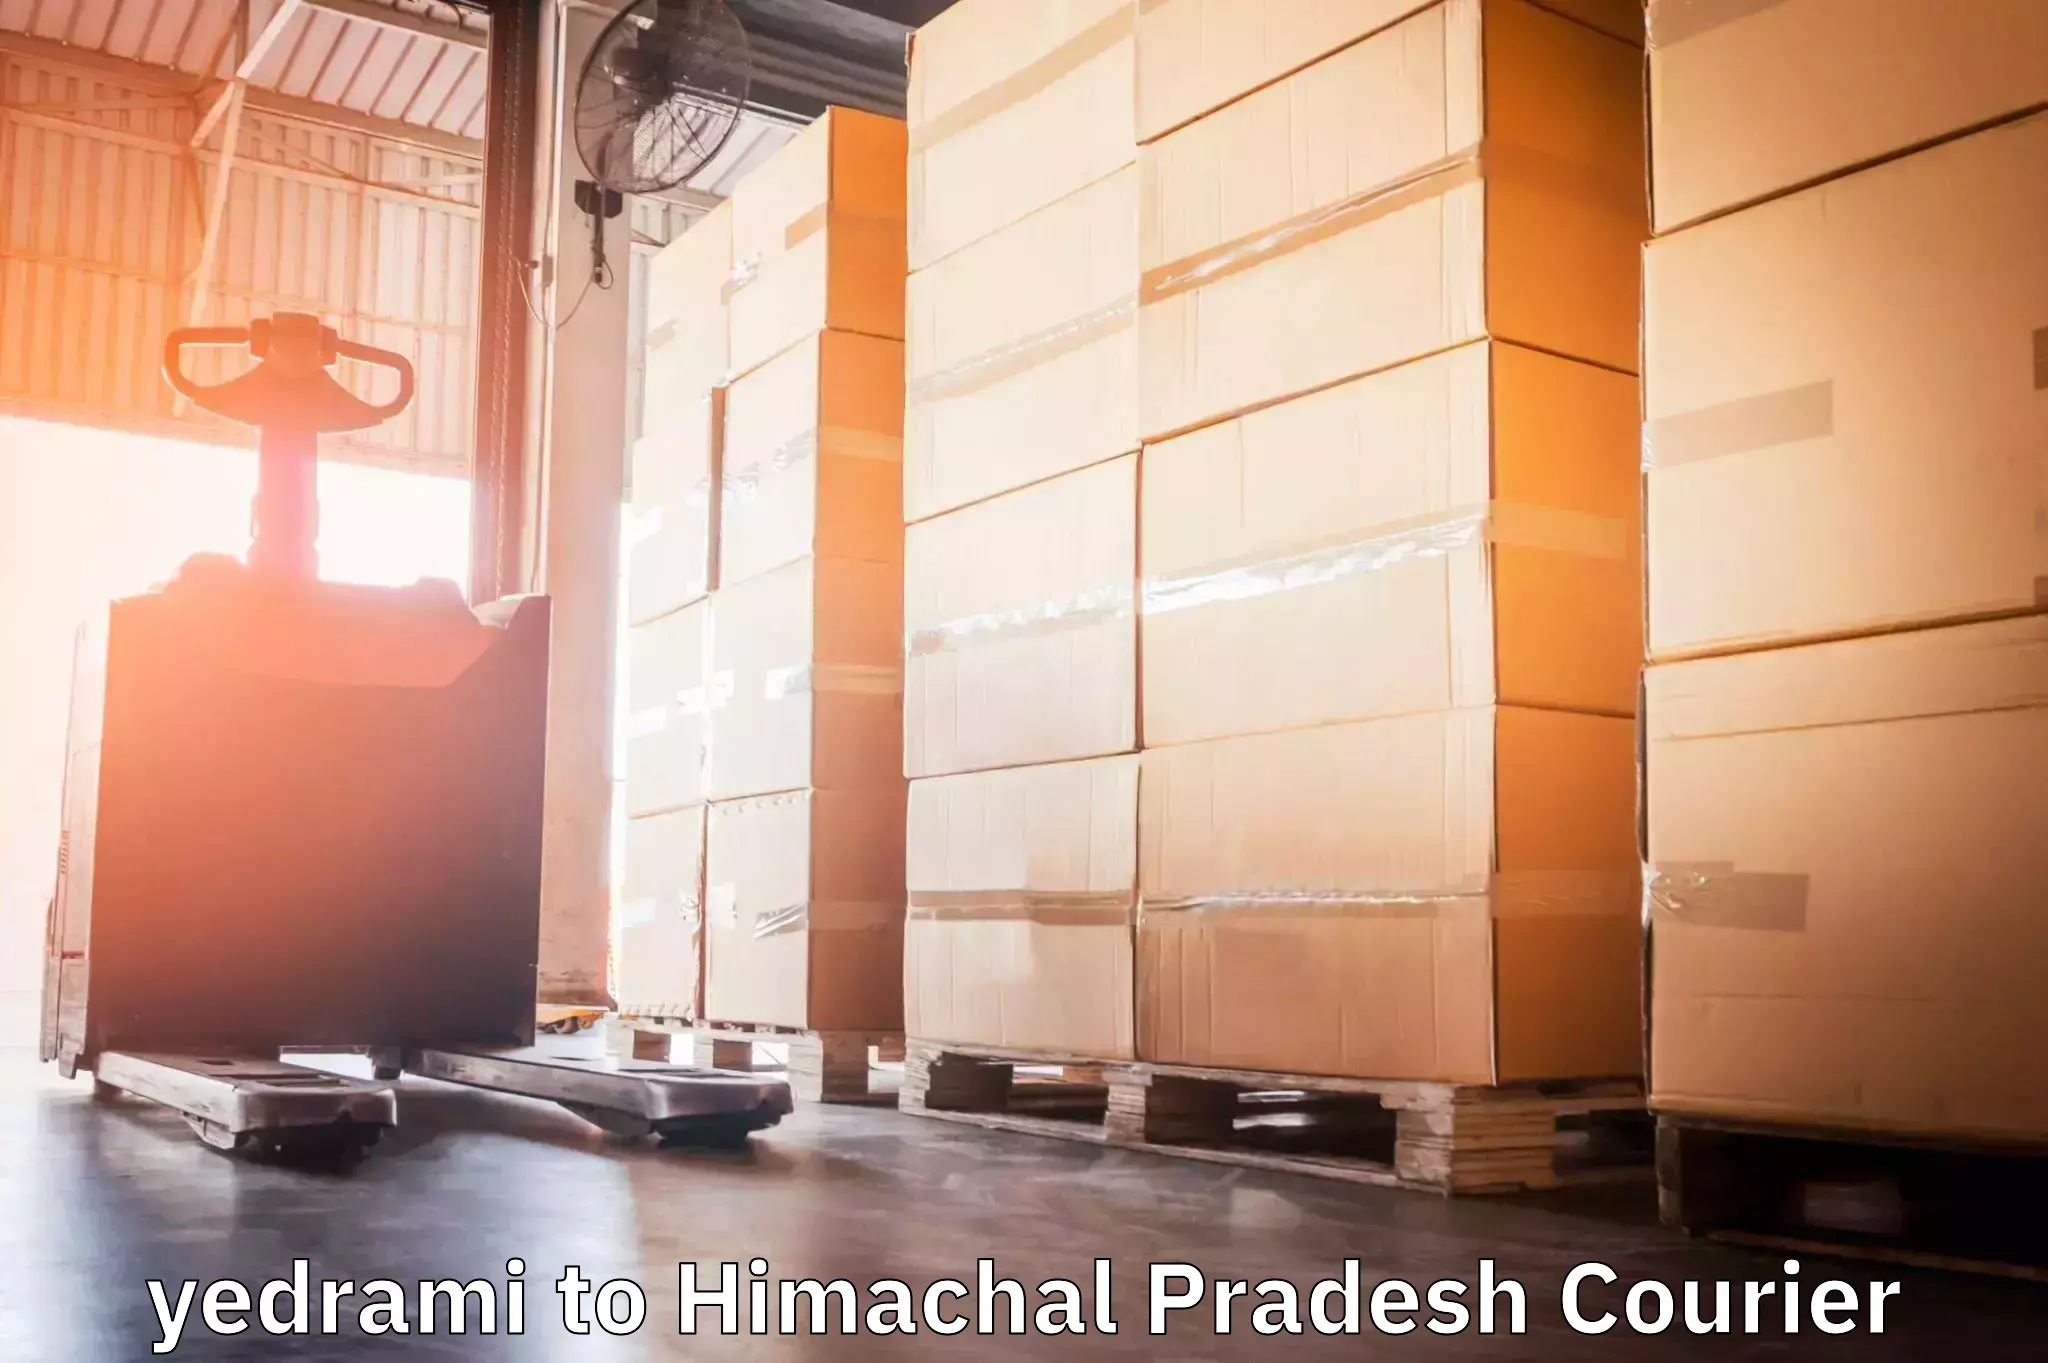 Expedited parcel delivery yedrami to Kotkhai